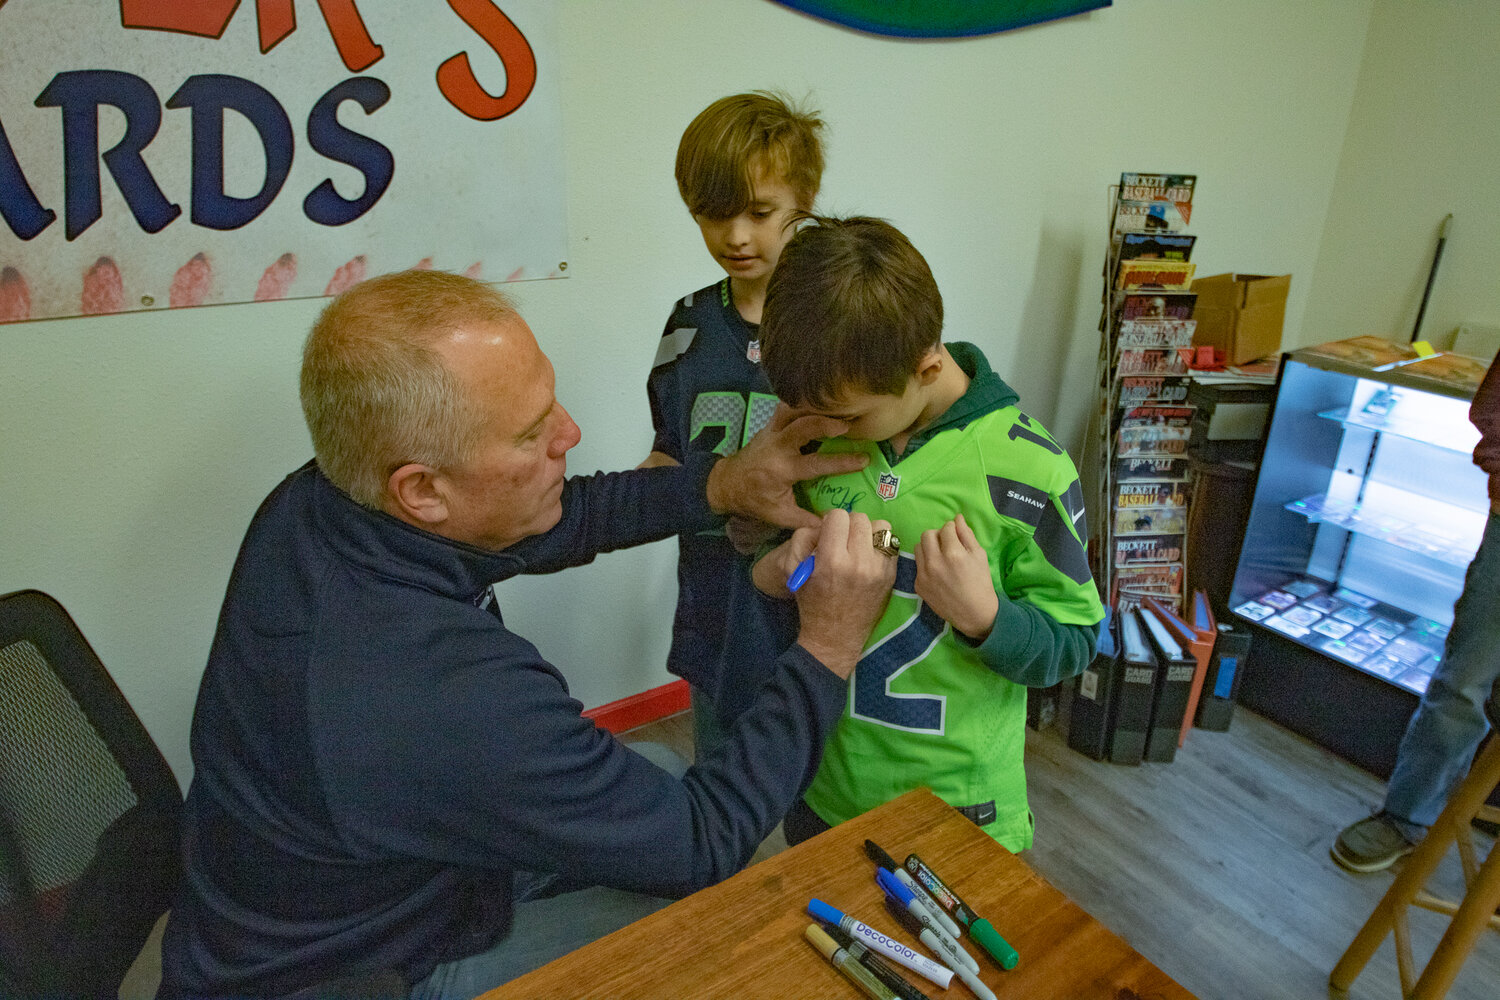 Cohen, in the green, and Bernard Collette, get their jerseys signed by Former Seattle Seahawks kicker Norm Johnson, also known as "Mr. Automatic," during the Keiper's Card and Memorabilia Show in downtown Centralia on Saturday, Dec. 2.